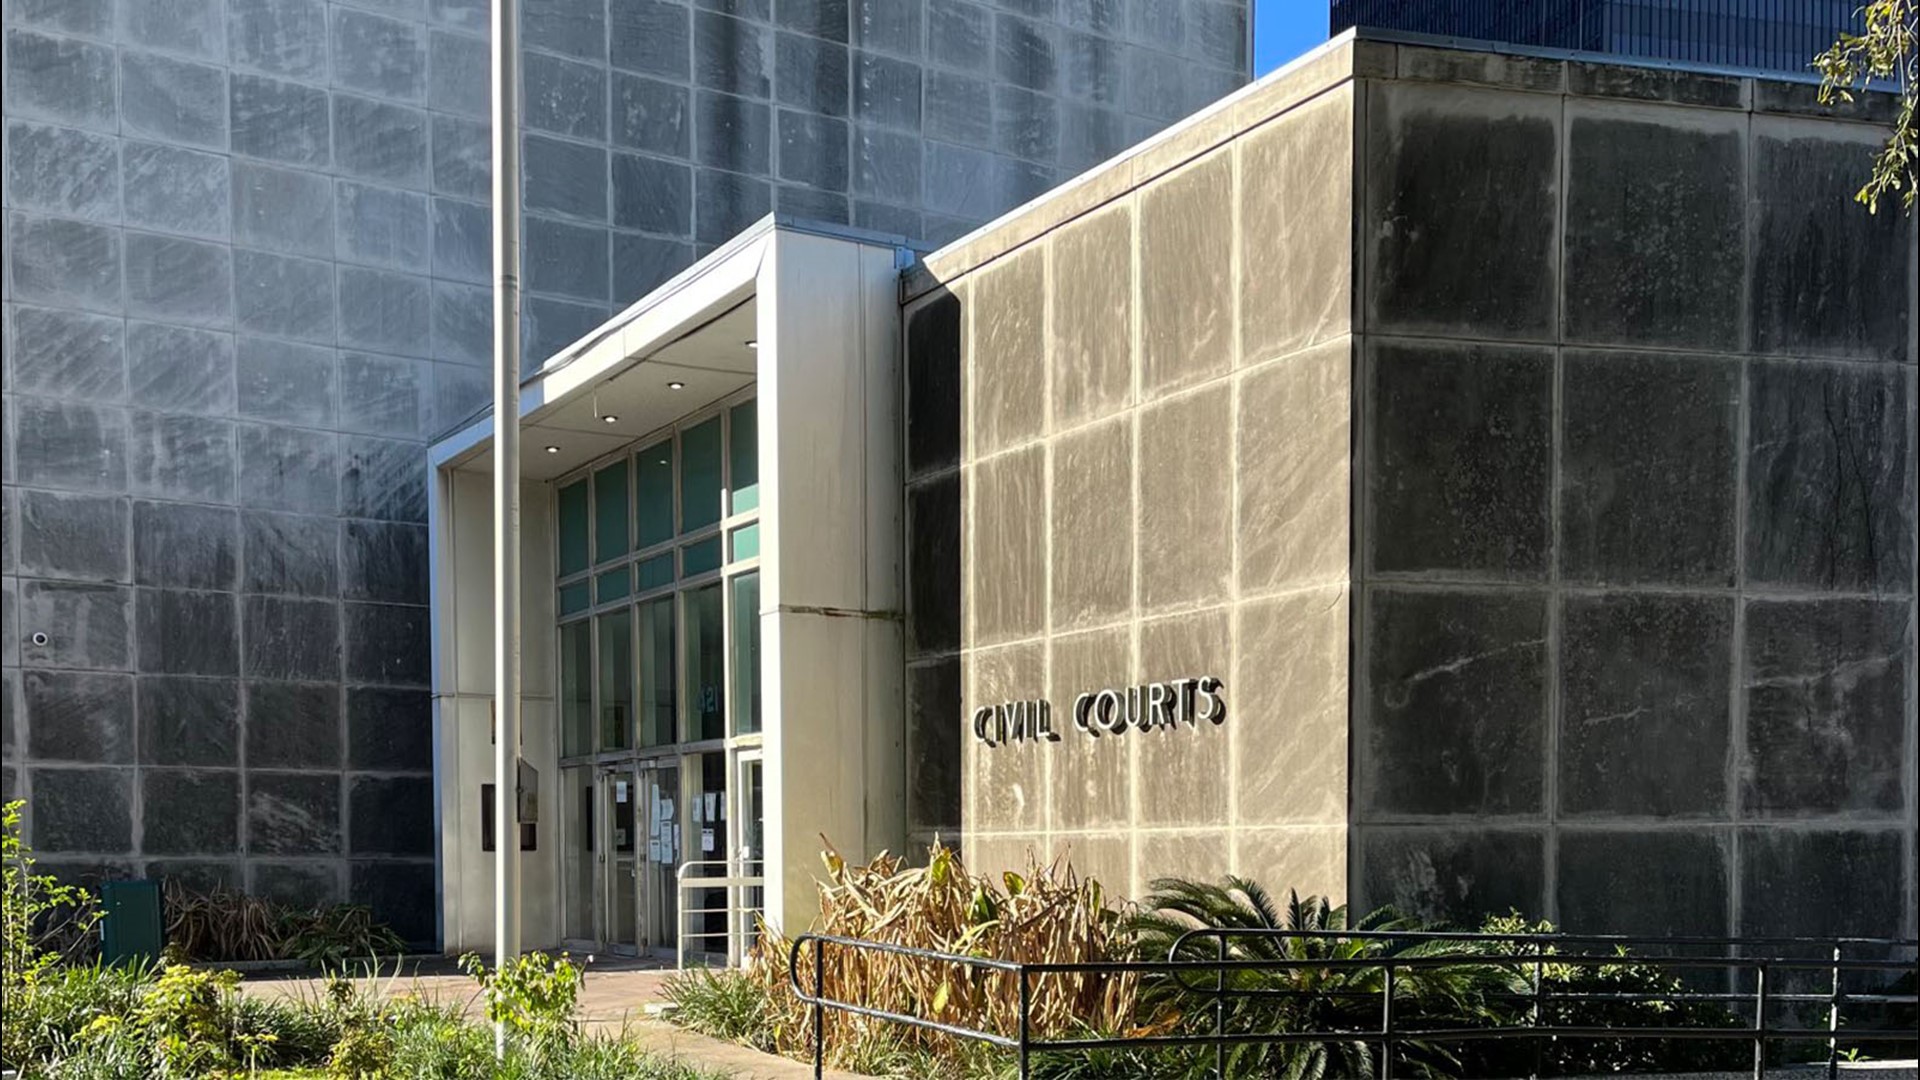 Delayed again: Orleans Civil District Court building not reopening